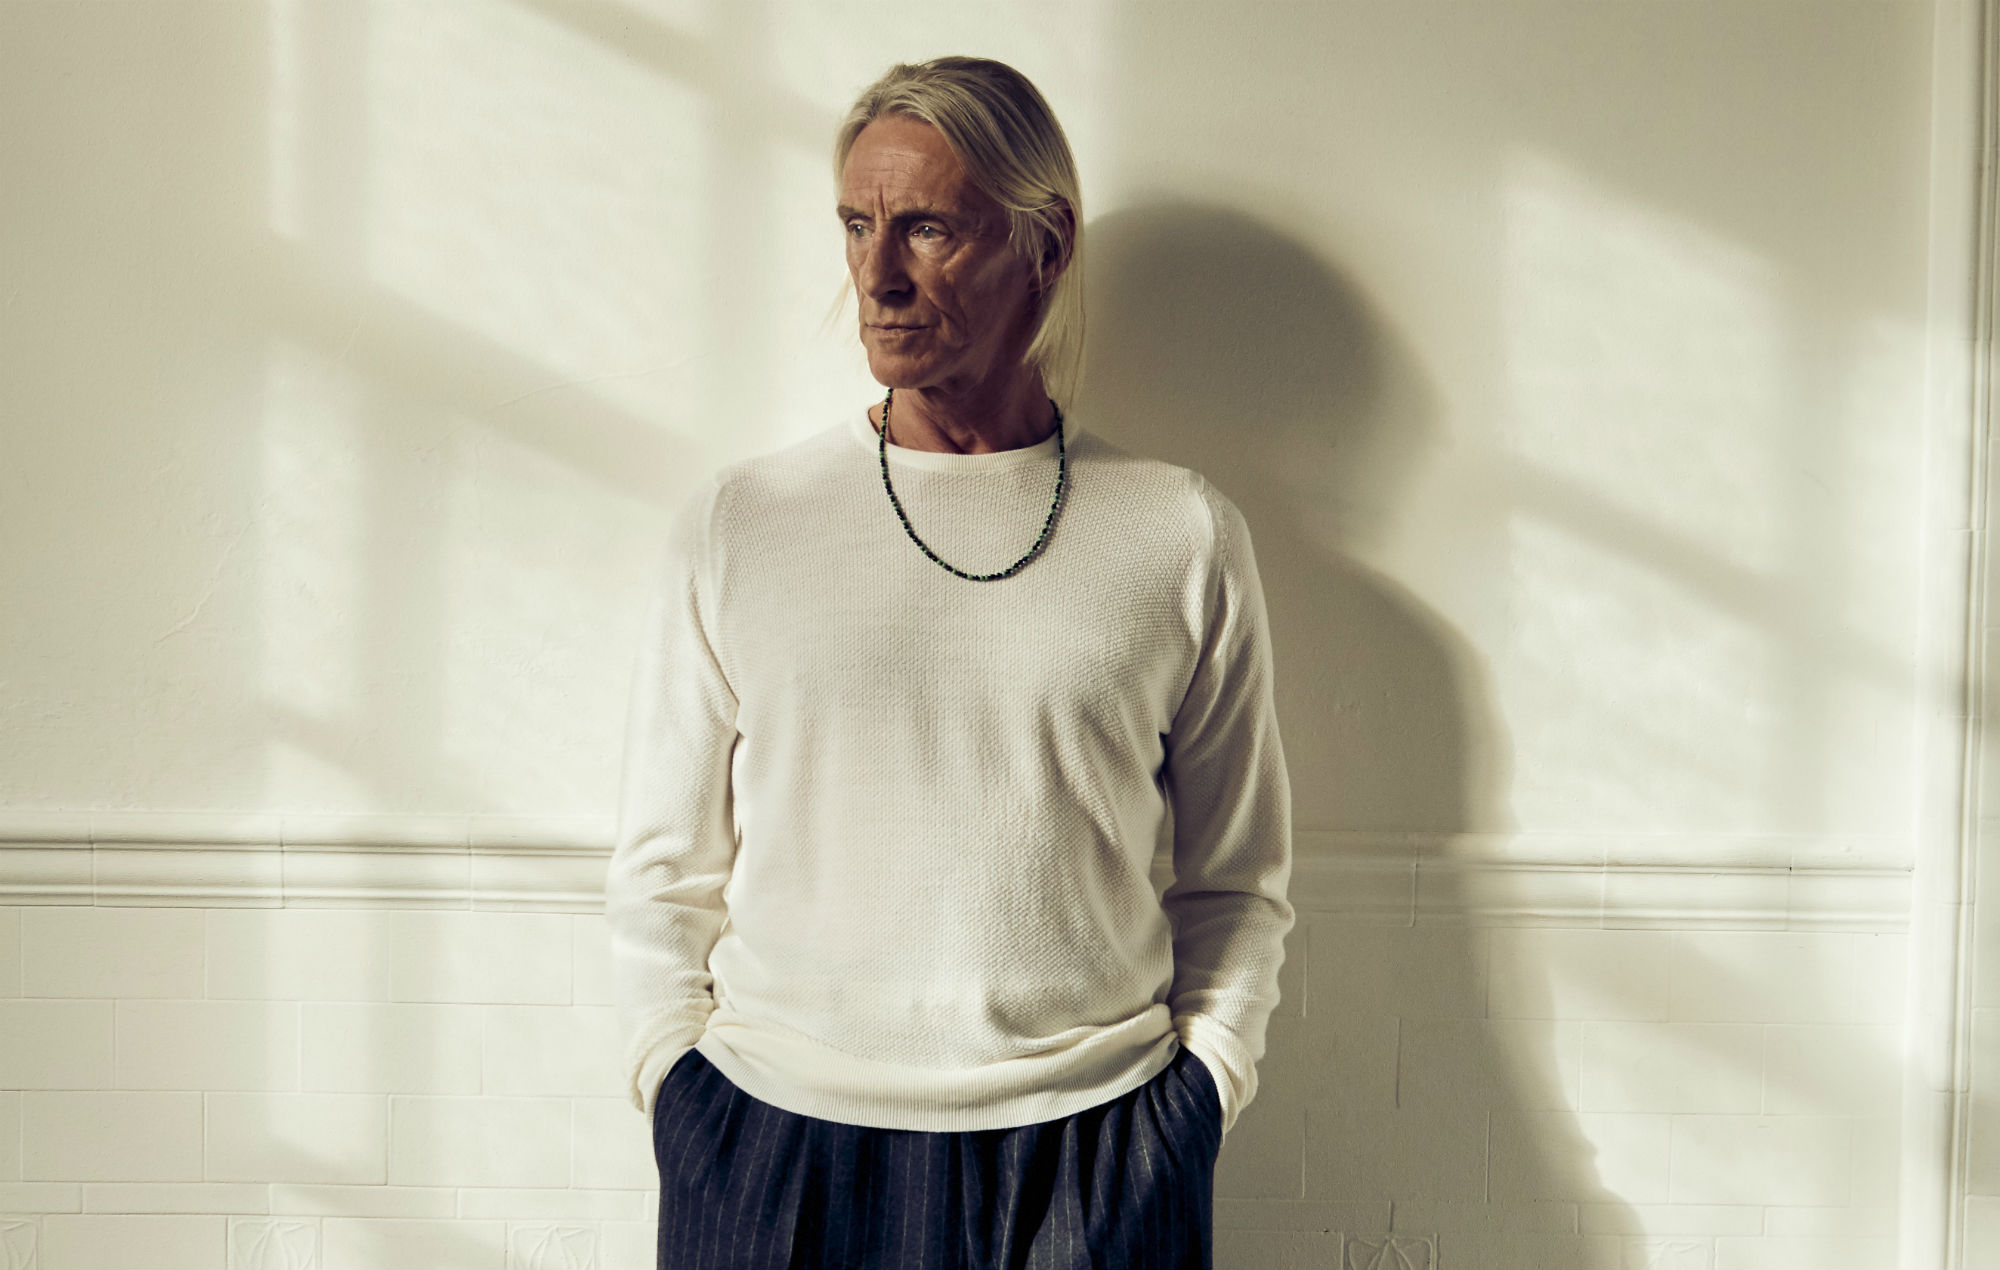 Paul Weller: “I’m trying different things as much as I can – time is of the essence, man”